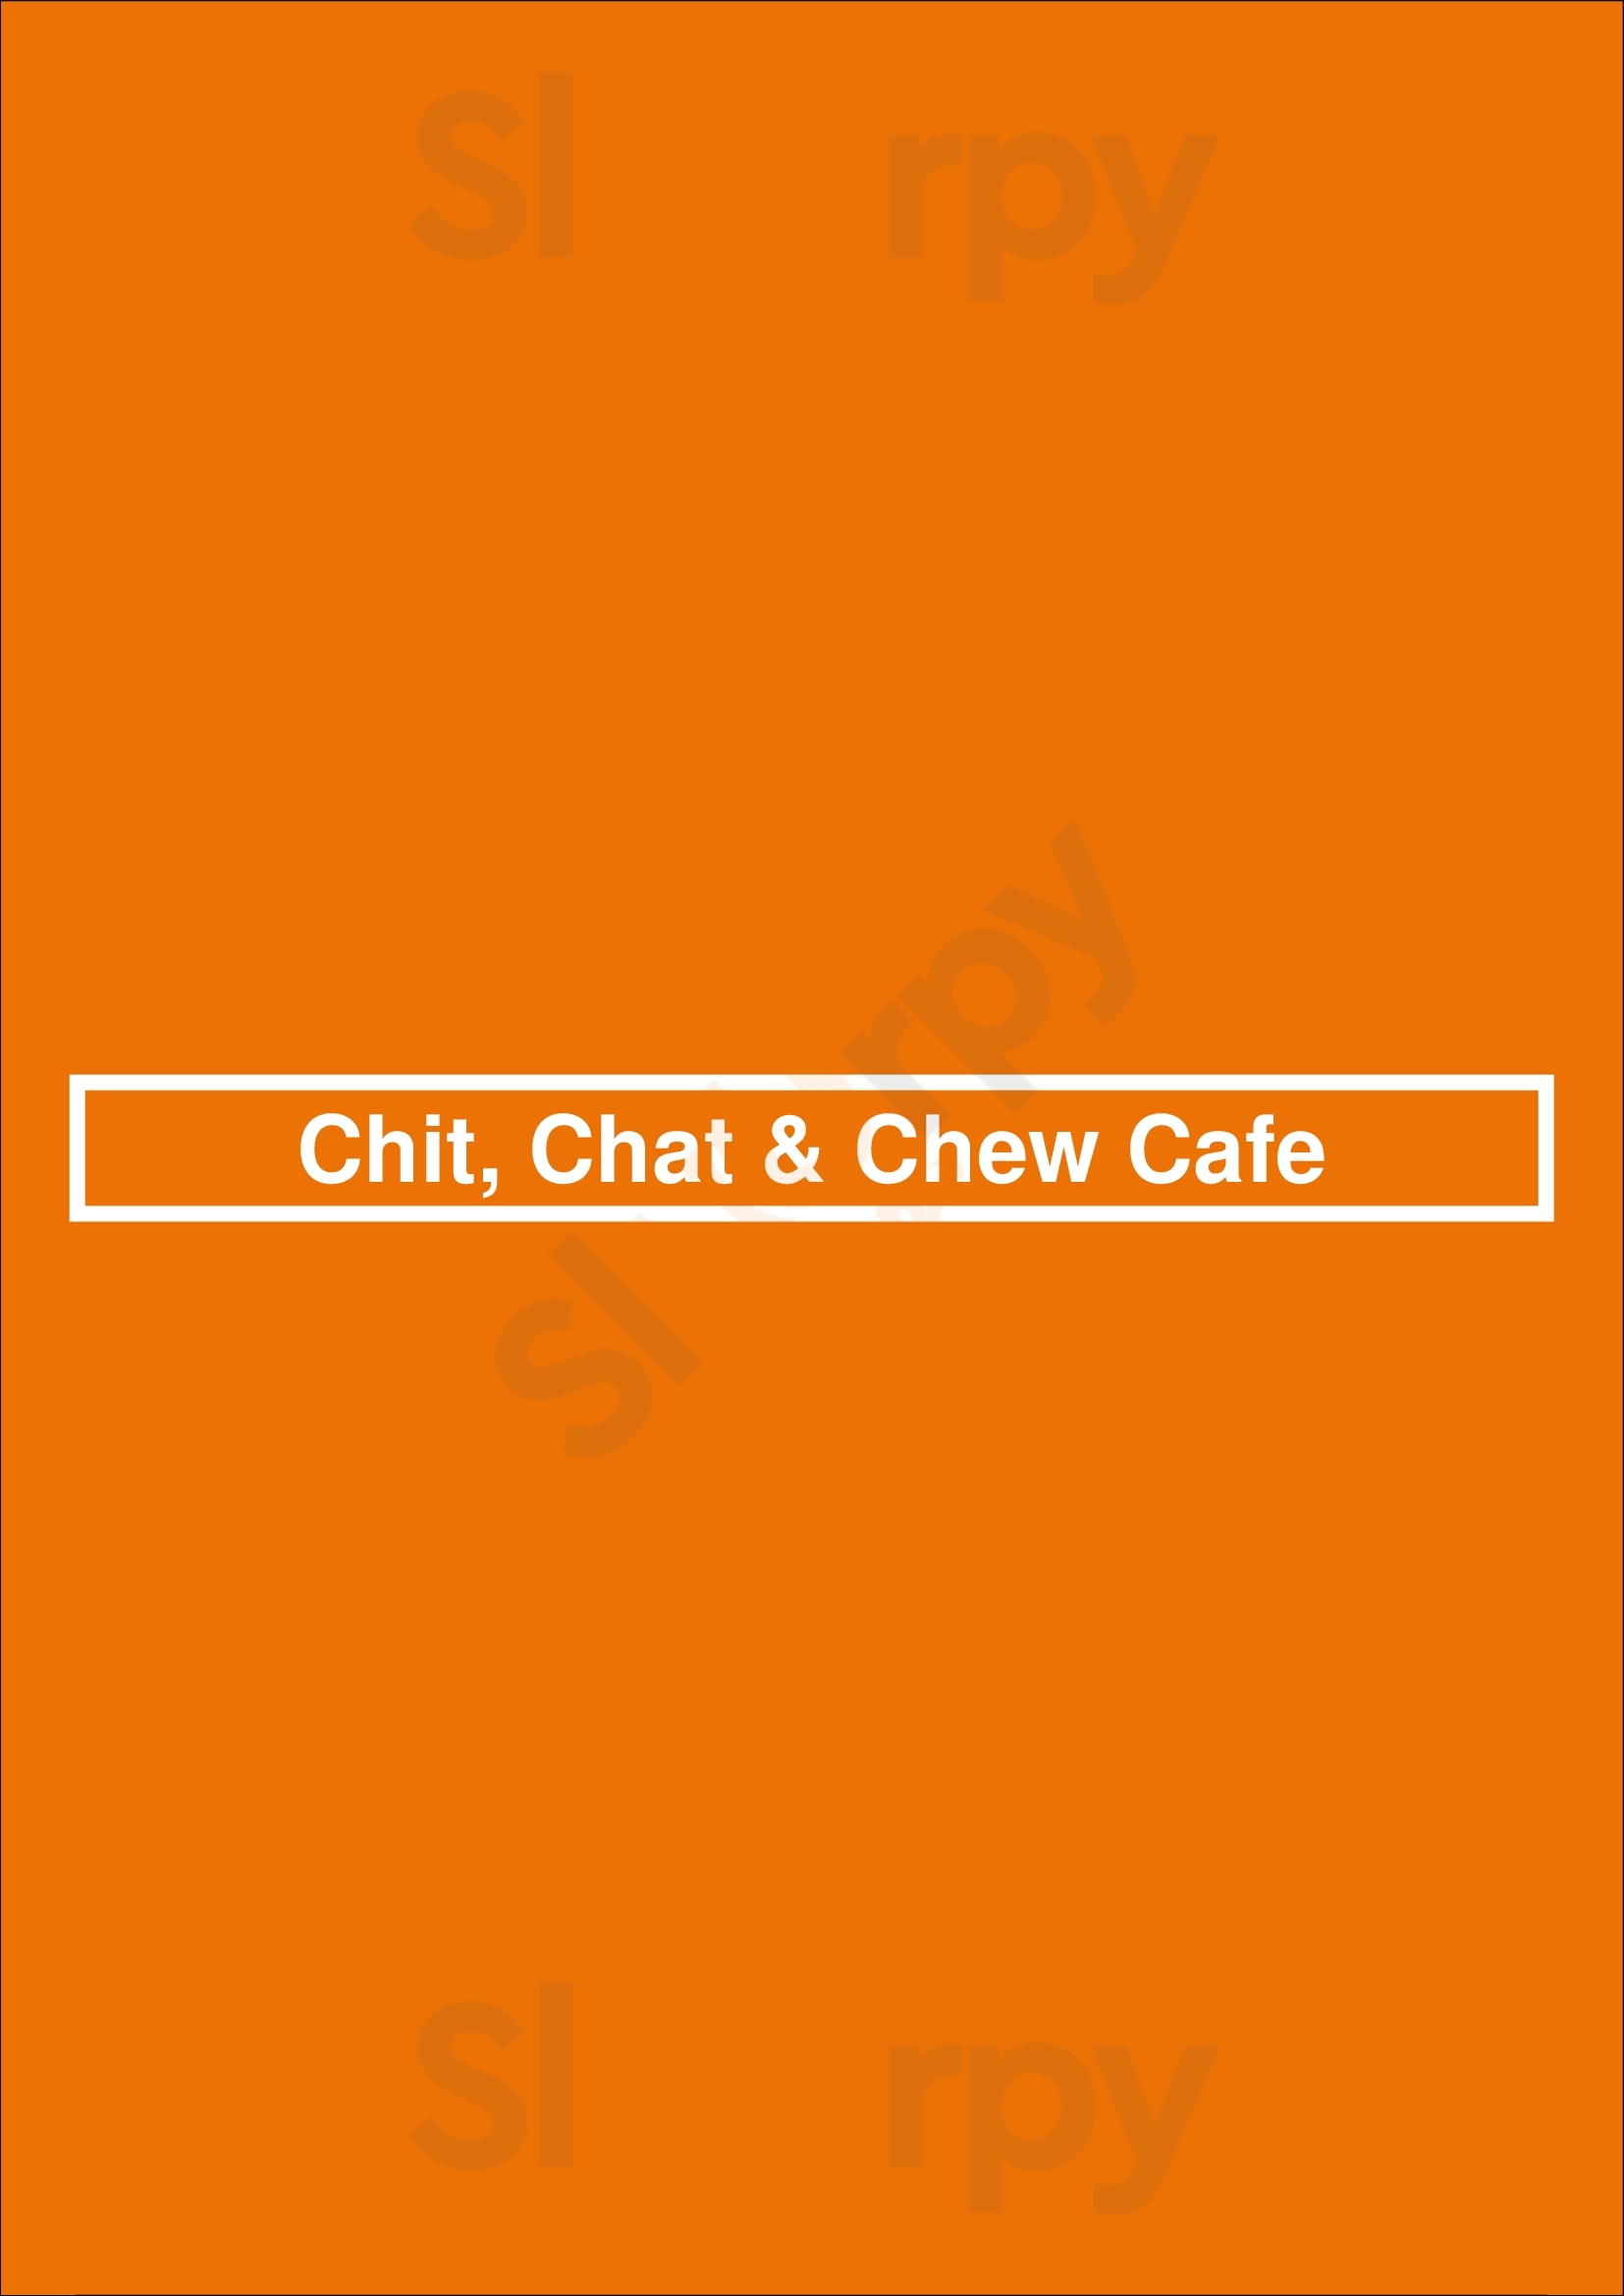 Chit, Chat & Chew Cafe Searcy Menu - 1